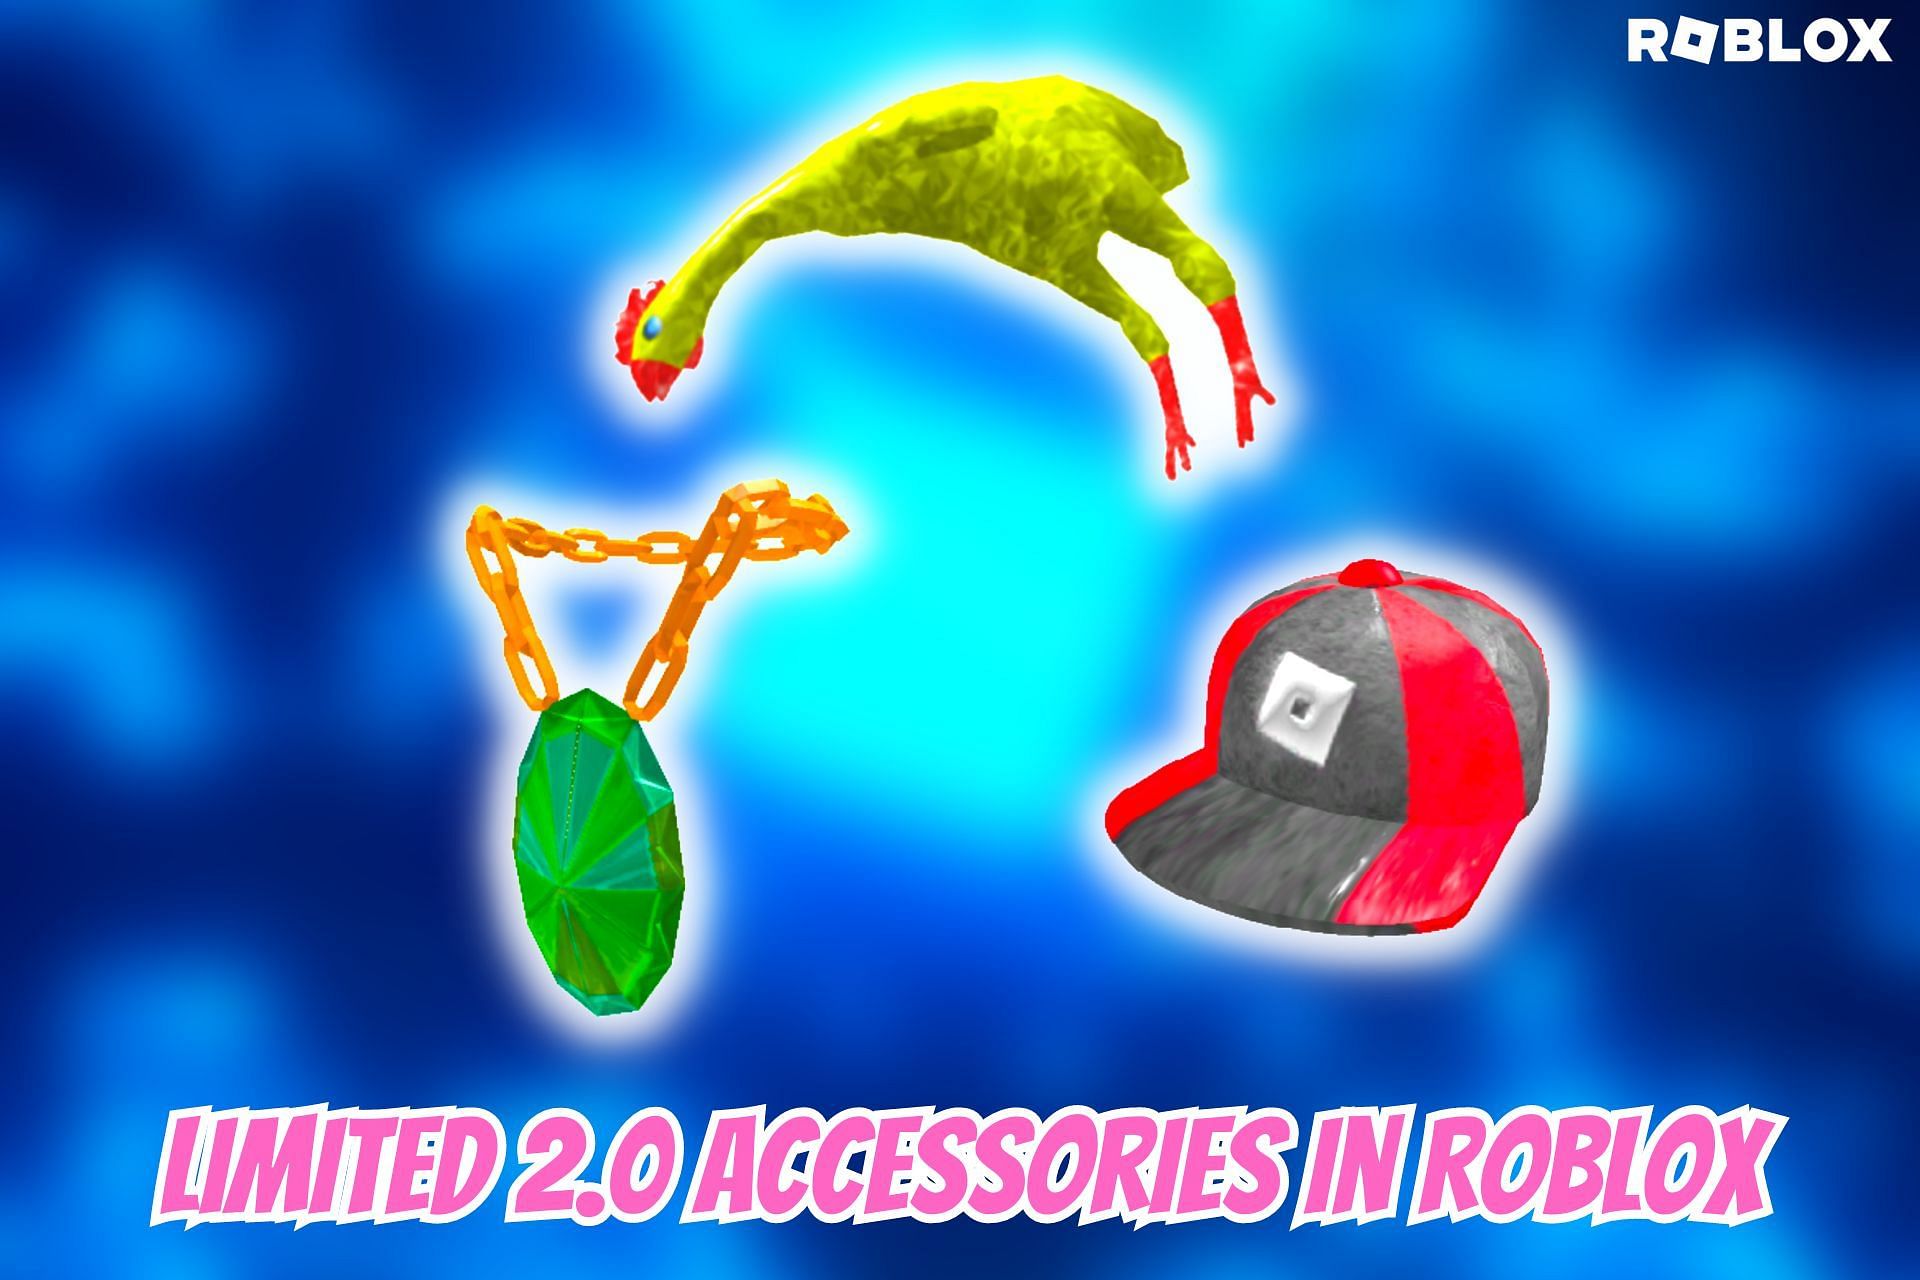 What are Limited 2.0 accessories in Roblox? How to get, trade and more  explained